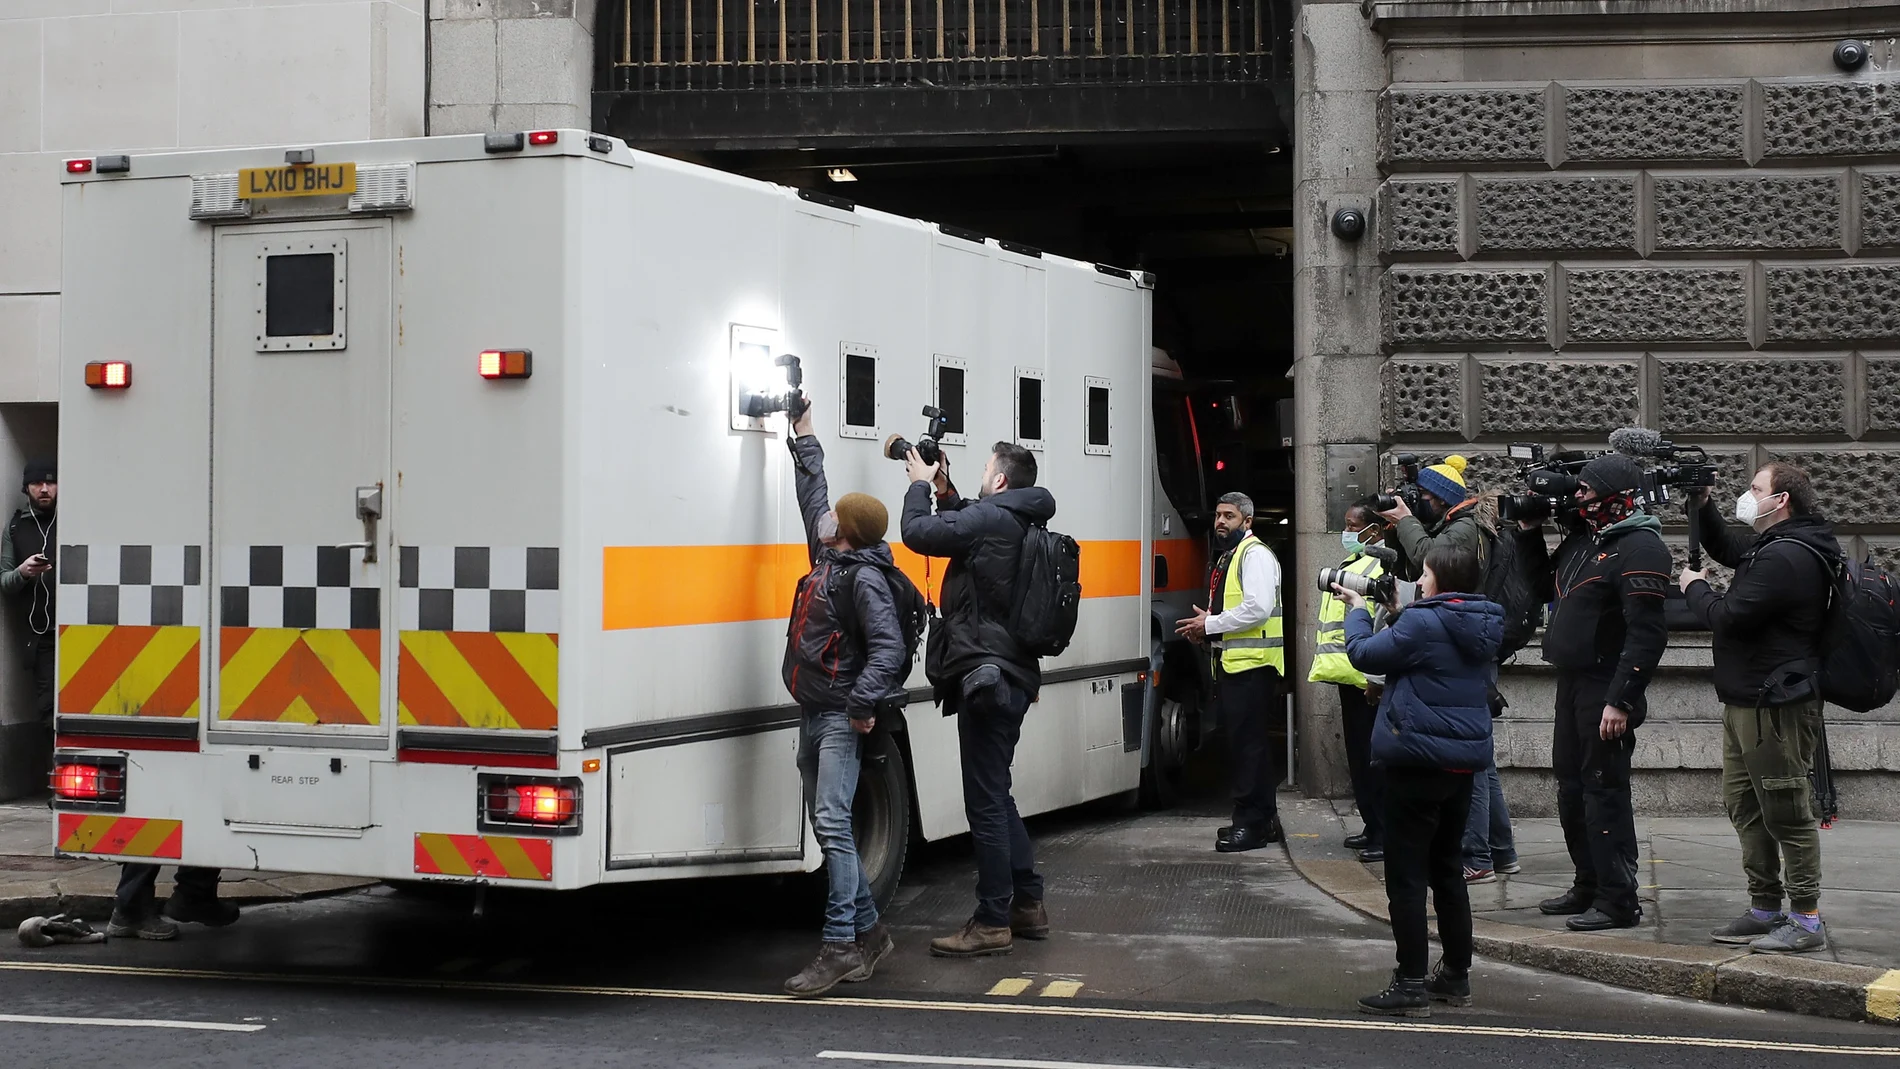 Journalists try to take pictures of the inside of a prison van moving into the Old Bailey, the Central Criminal Court in London, Tuesday, March 16, 2021. Serving British police officer Wayne Couzens stands accused of the kidnap and murder of 33-year-old Sarah Everard, who went missing while walking home in south London on March 3. (AP Photo/Frank Augstein)